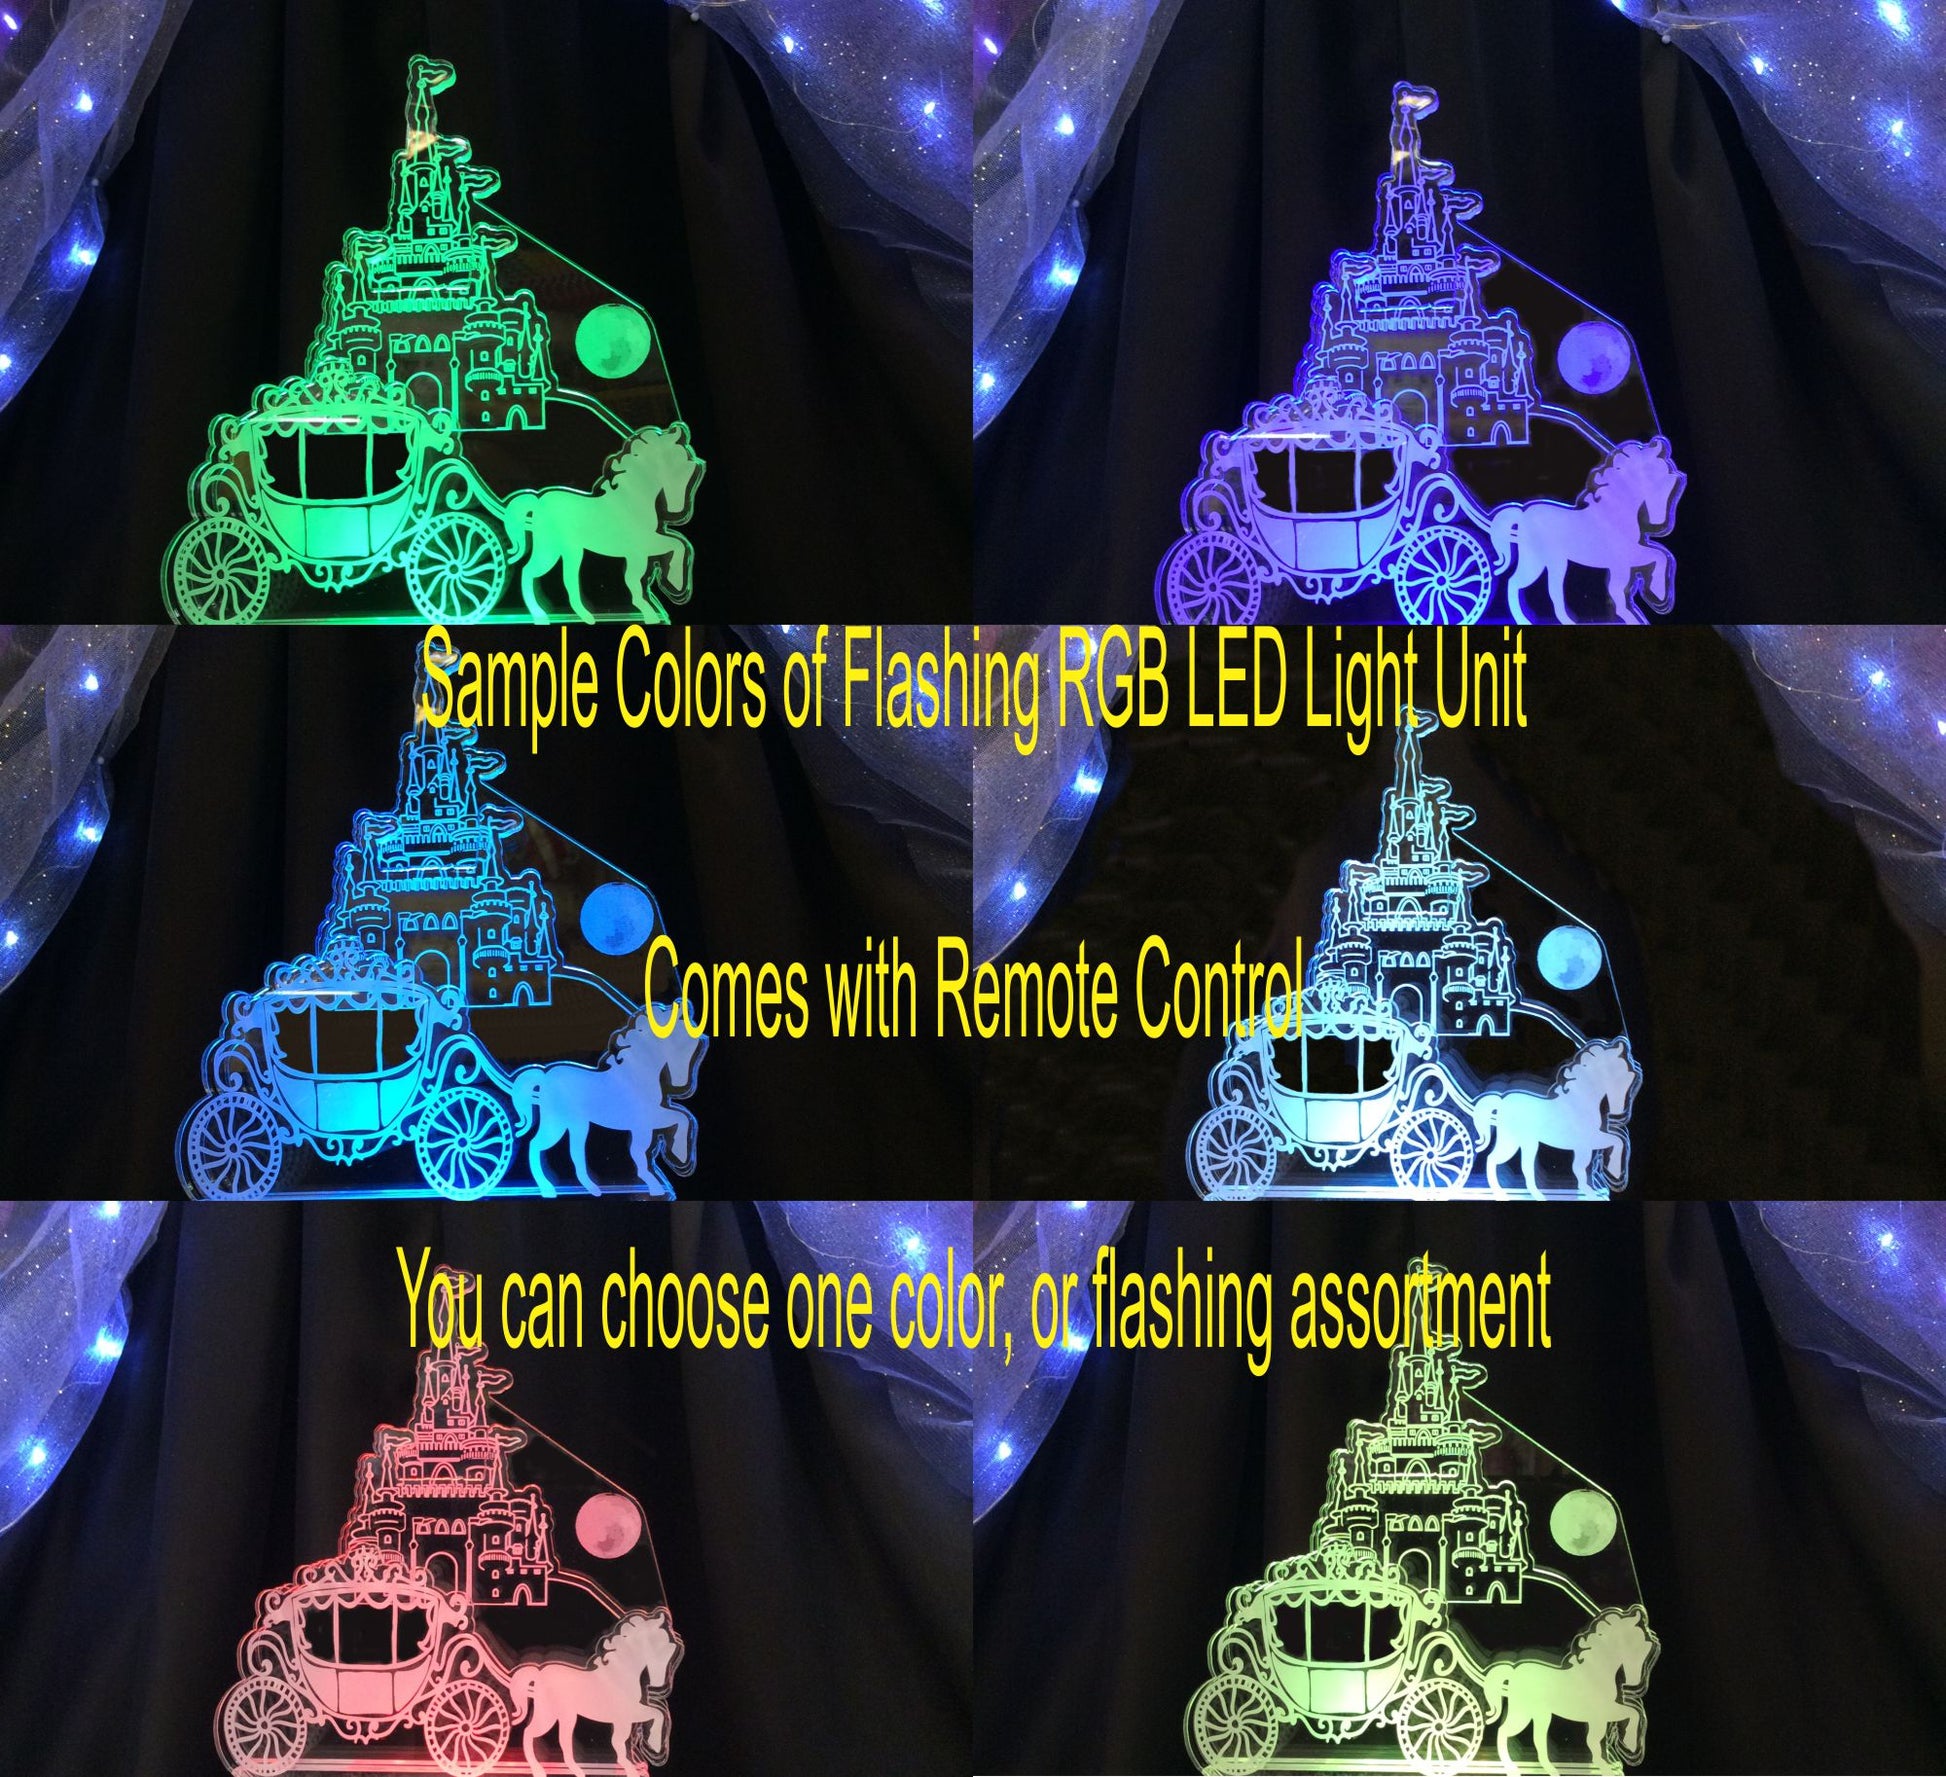 acrylic castle and carriage cake topper lit up, shown in a variety of RGB colored LED lighting